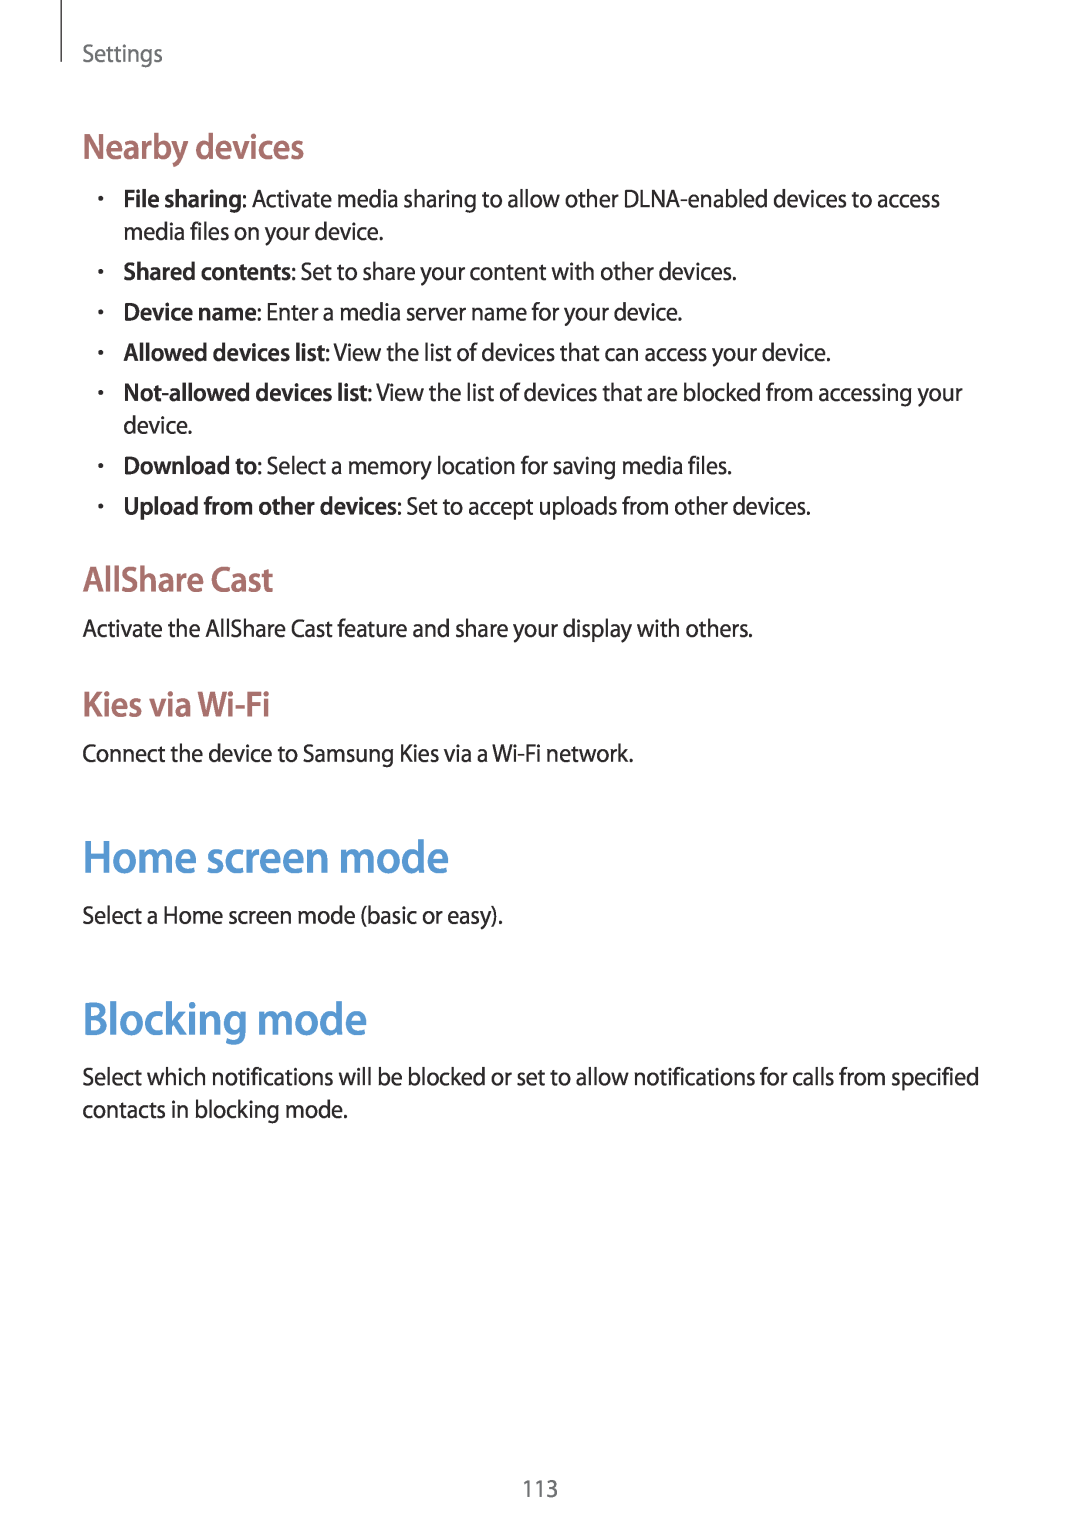 Samsung GT-N5100 user manual Home screen mode, Blocking mode, Nearby devices, AllShare Cast, Kies via Wi-Fi, Settings 